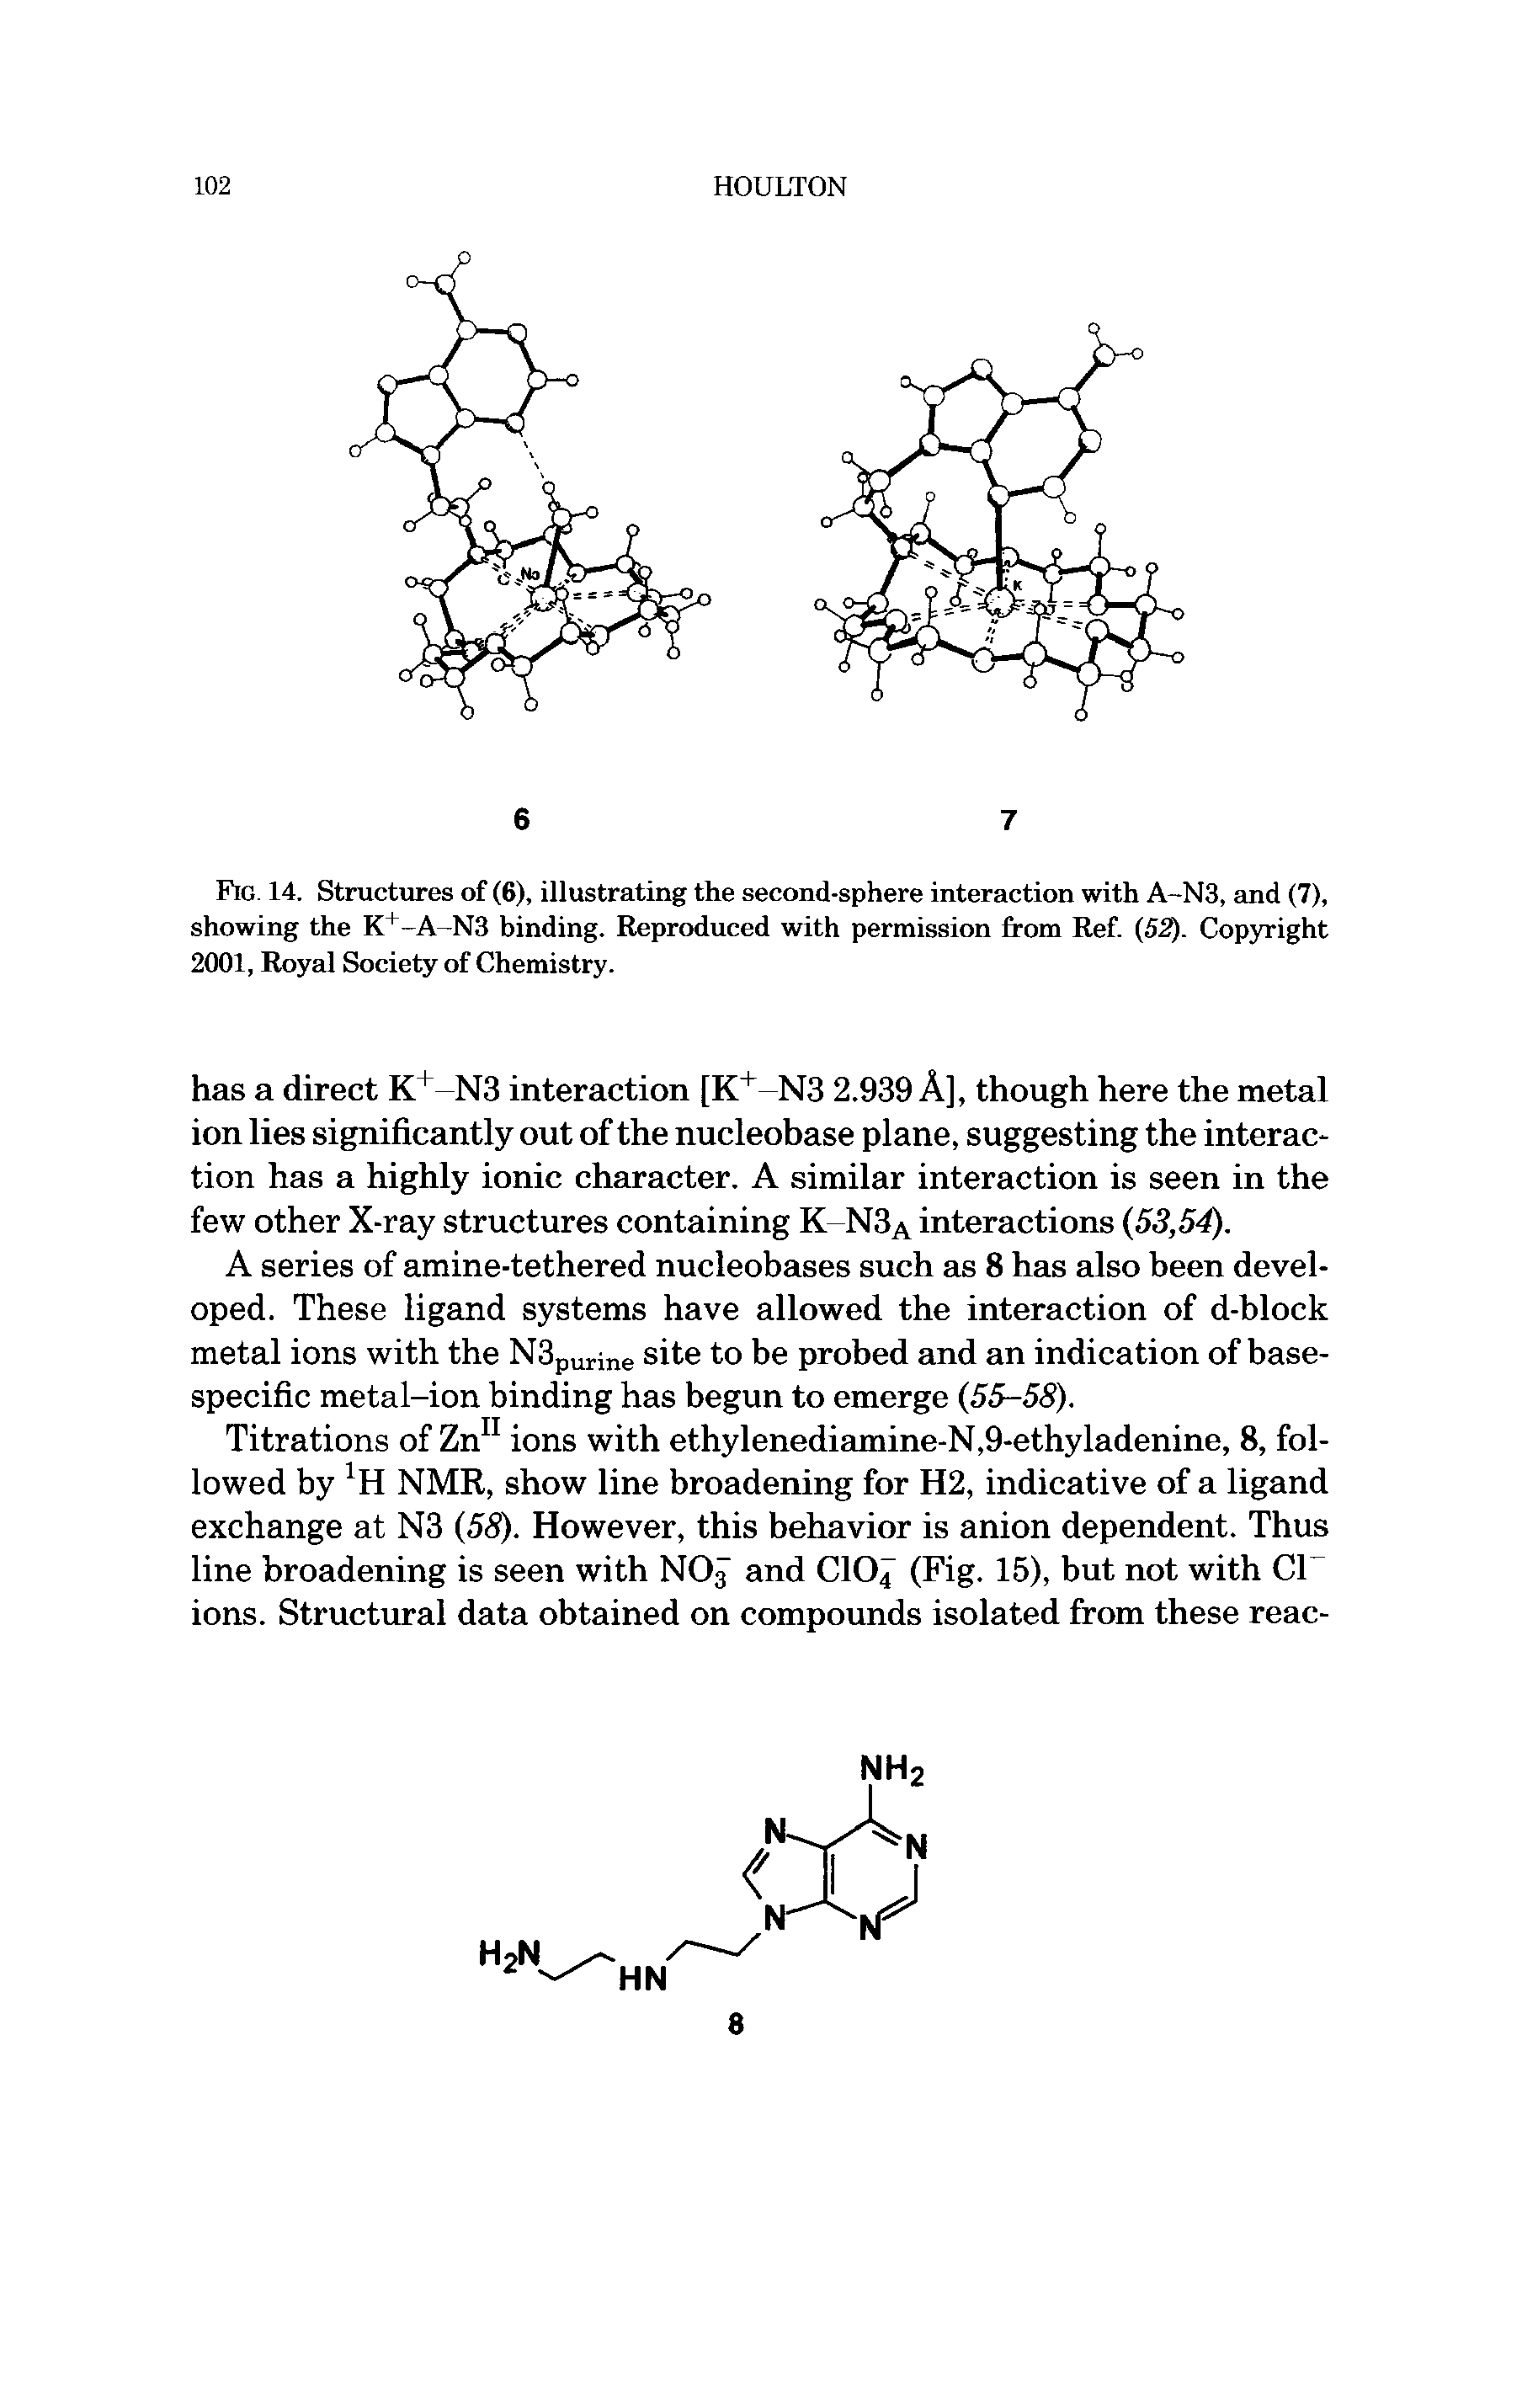 Fig. 14. Structures of (6), illustrating the second-sphere interaction with A-N3, and (7), showing the K1 A N3 binding. Reproduced with permission from Ref. (52). Copyright 2001, Royal Society of Chemistry.